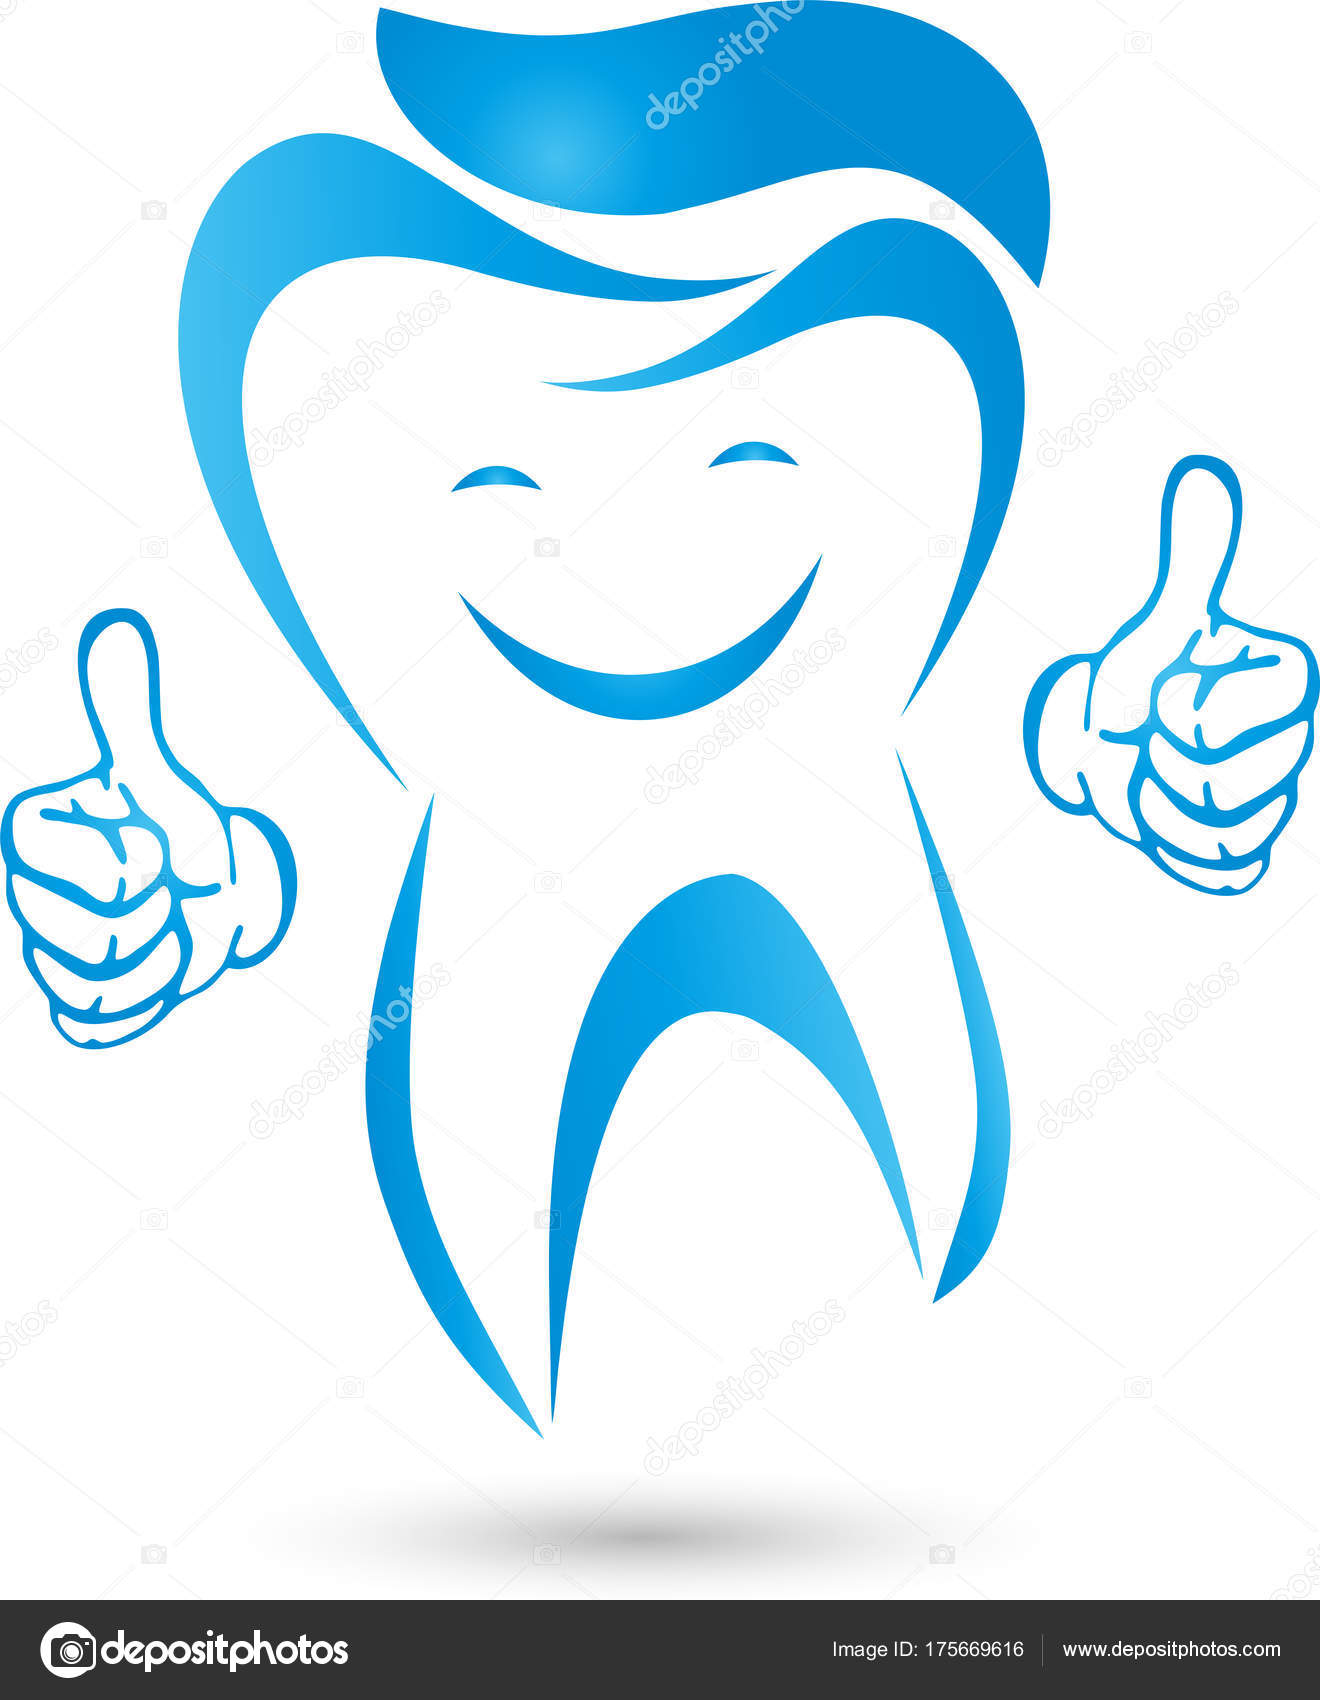 Tooth Brush Smile Vector Stock Illustration - Download Image Now - Logo,  Smiling, Toothbrush - iStock